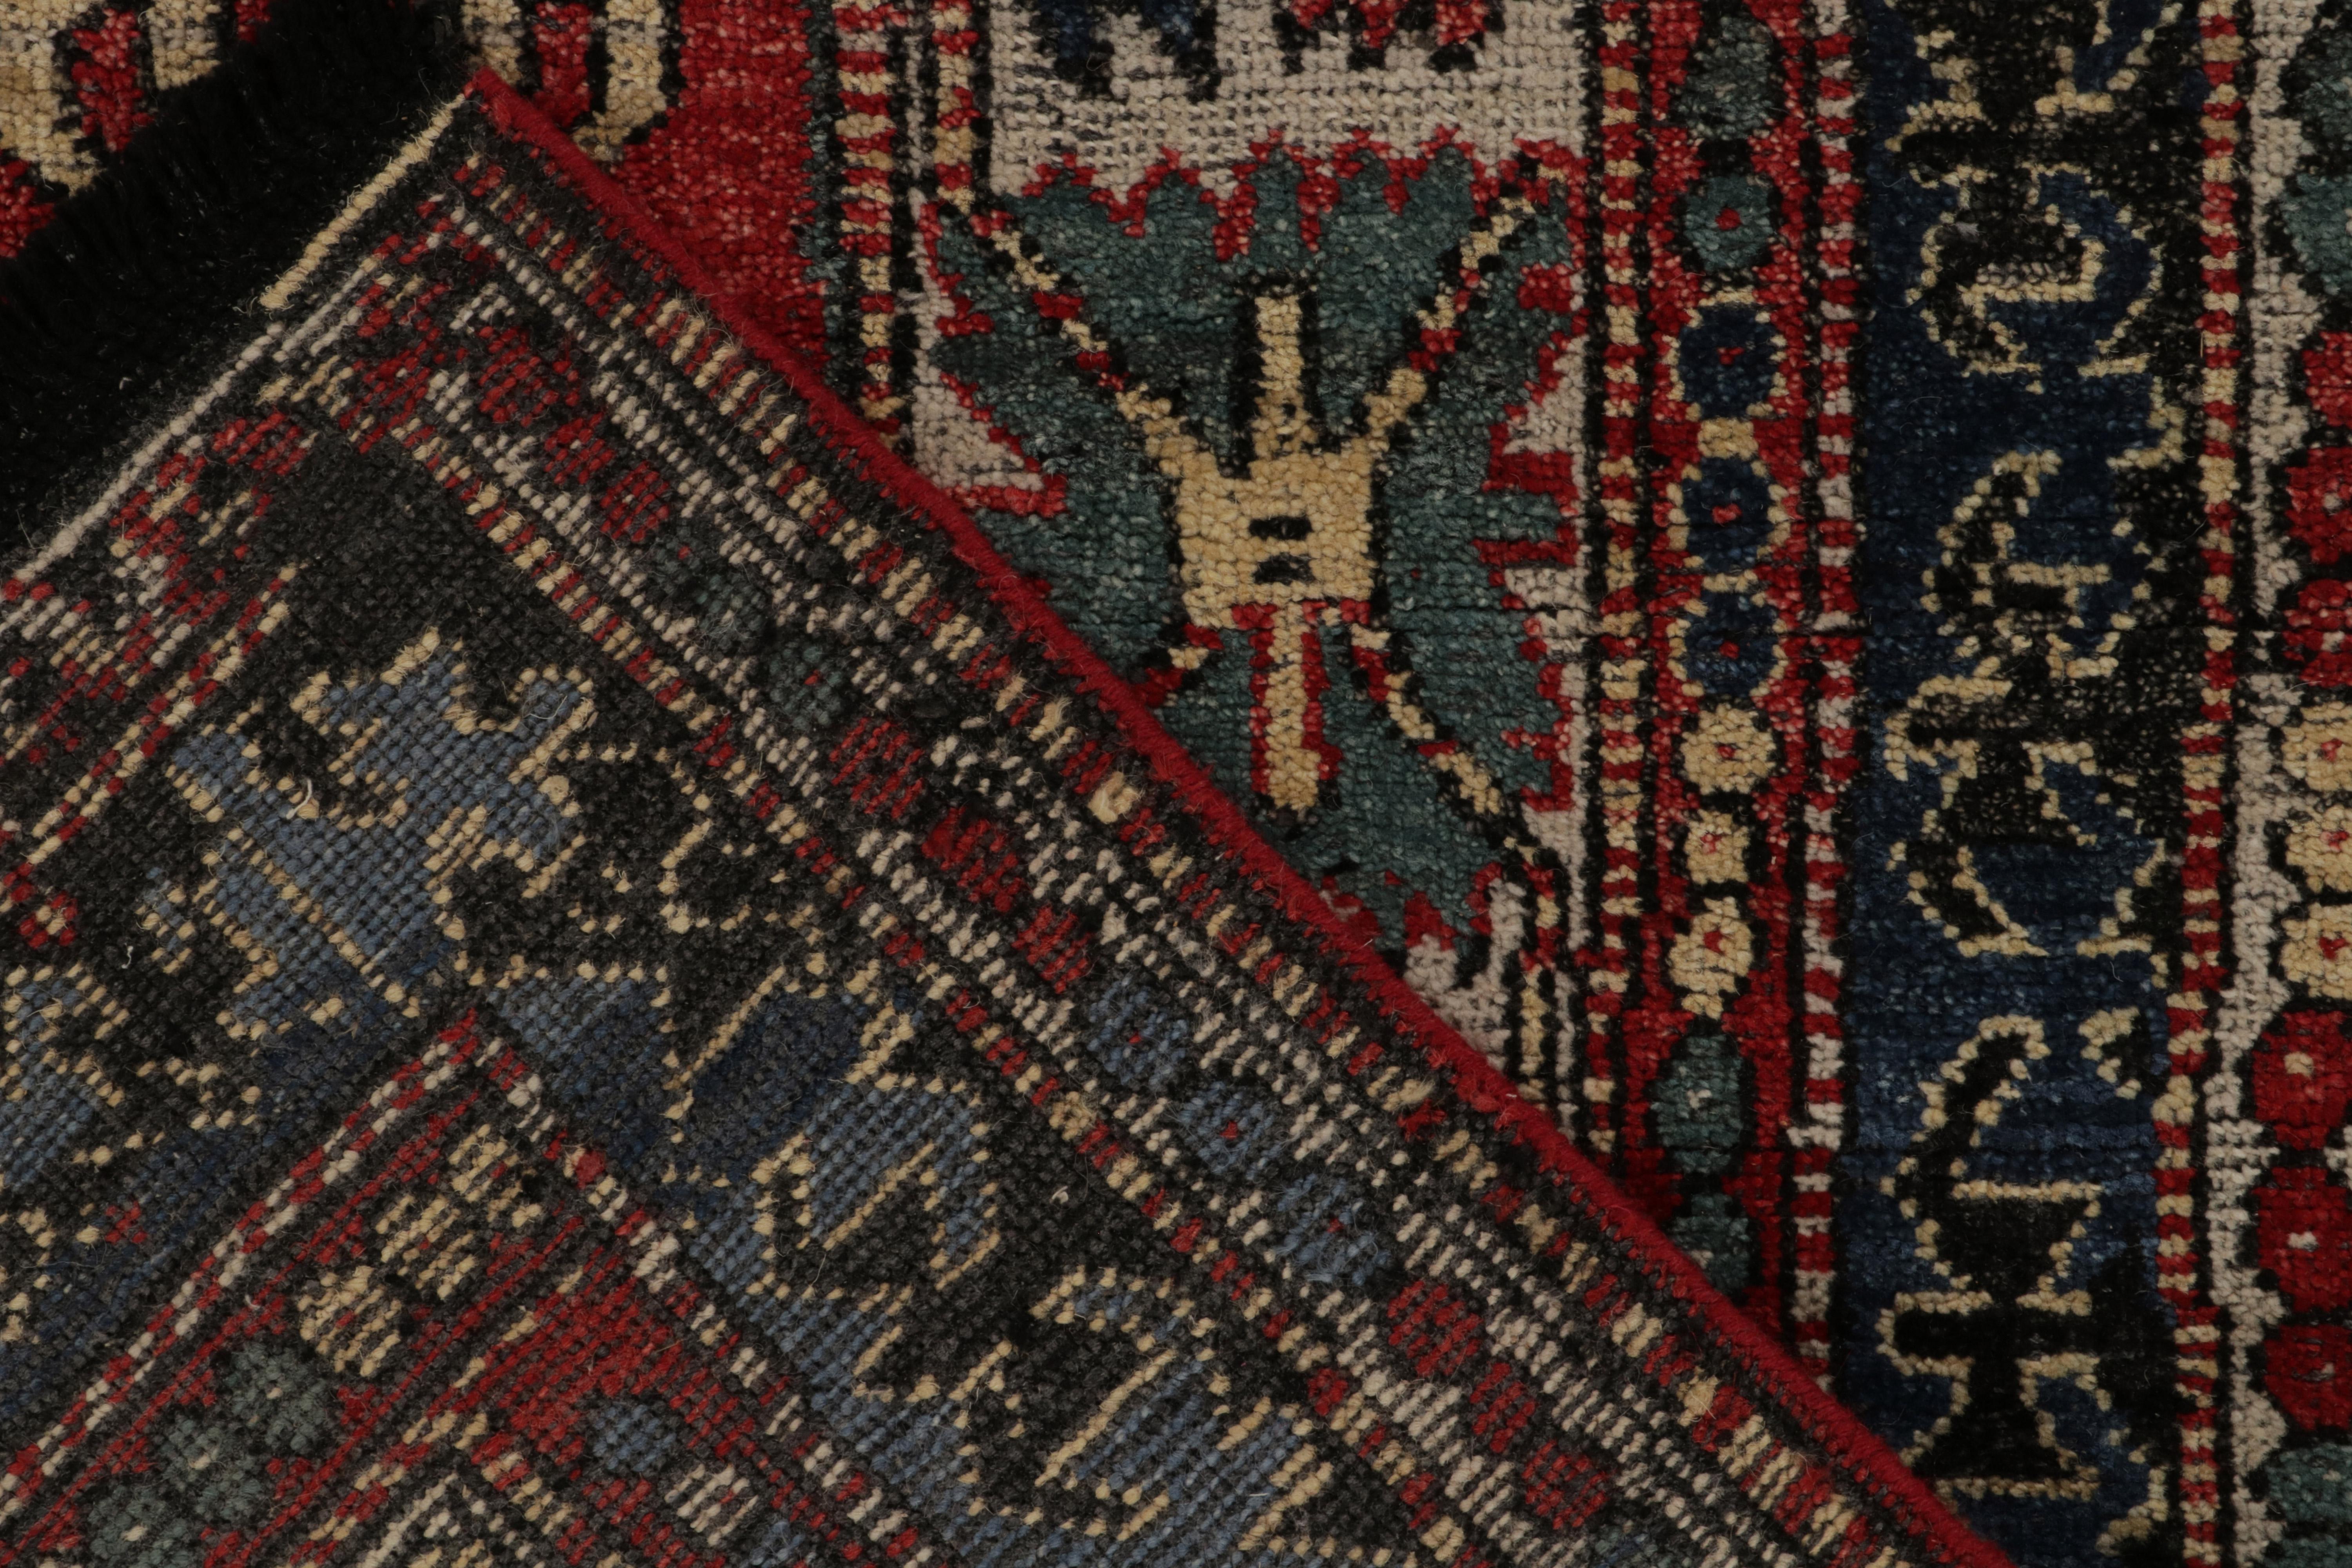 Wool Rug & Kilim’s Antique Turkmen Style Rug in Red with Blue & Gold Tribal Patterns For Sale